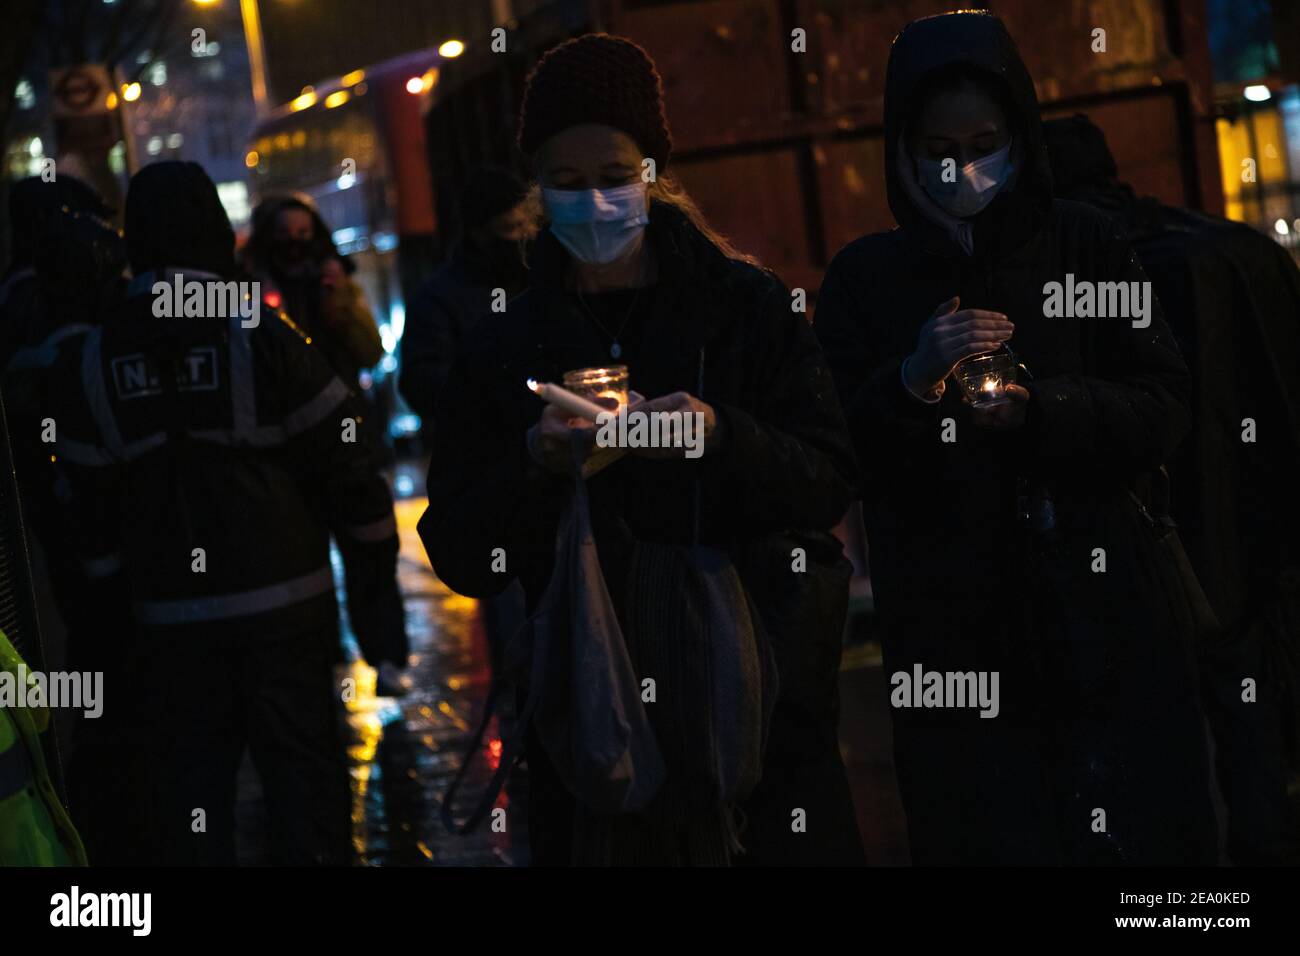 London, UK. 6th February, 2021. Candlelit vigil in remembrence of the lost trees at Euston Square, London as part of the Stop HS2 protest February 6th 2021. Two women carry candles Credit: Denise Laura Baker/Alamy Live News Stock Photo